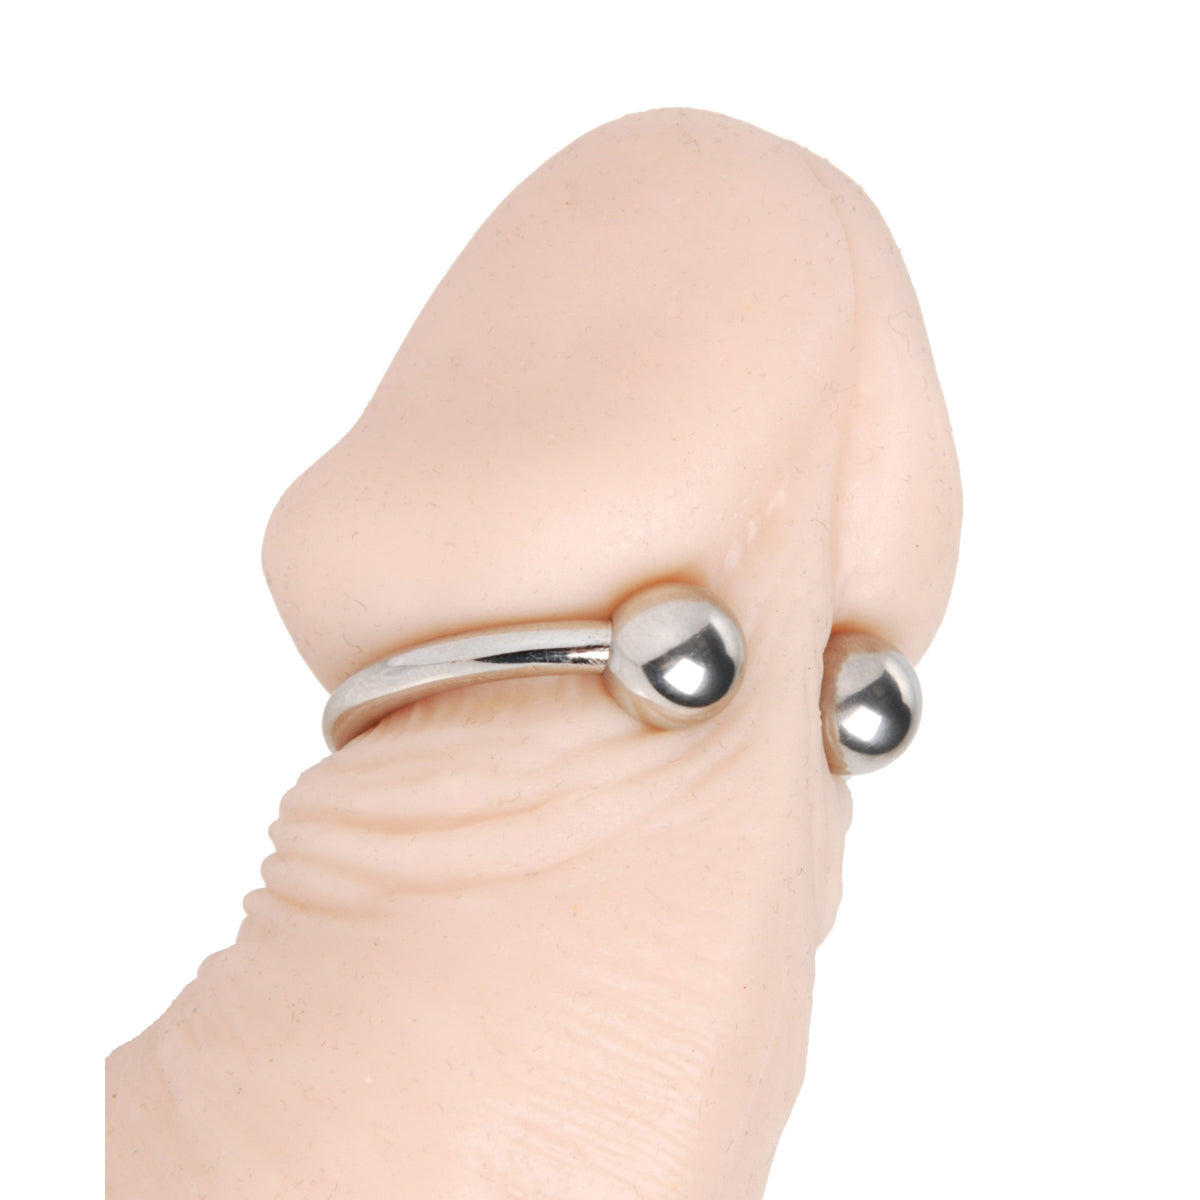 spike glans ring stainless steel cock